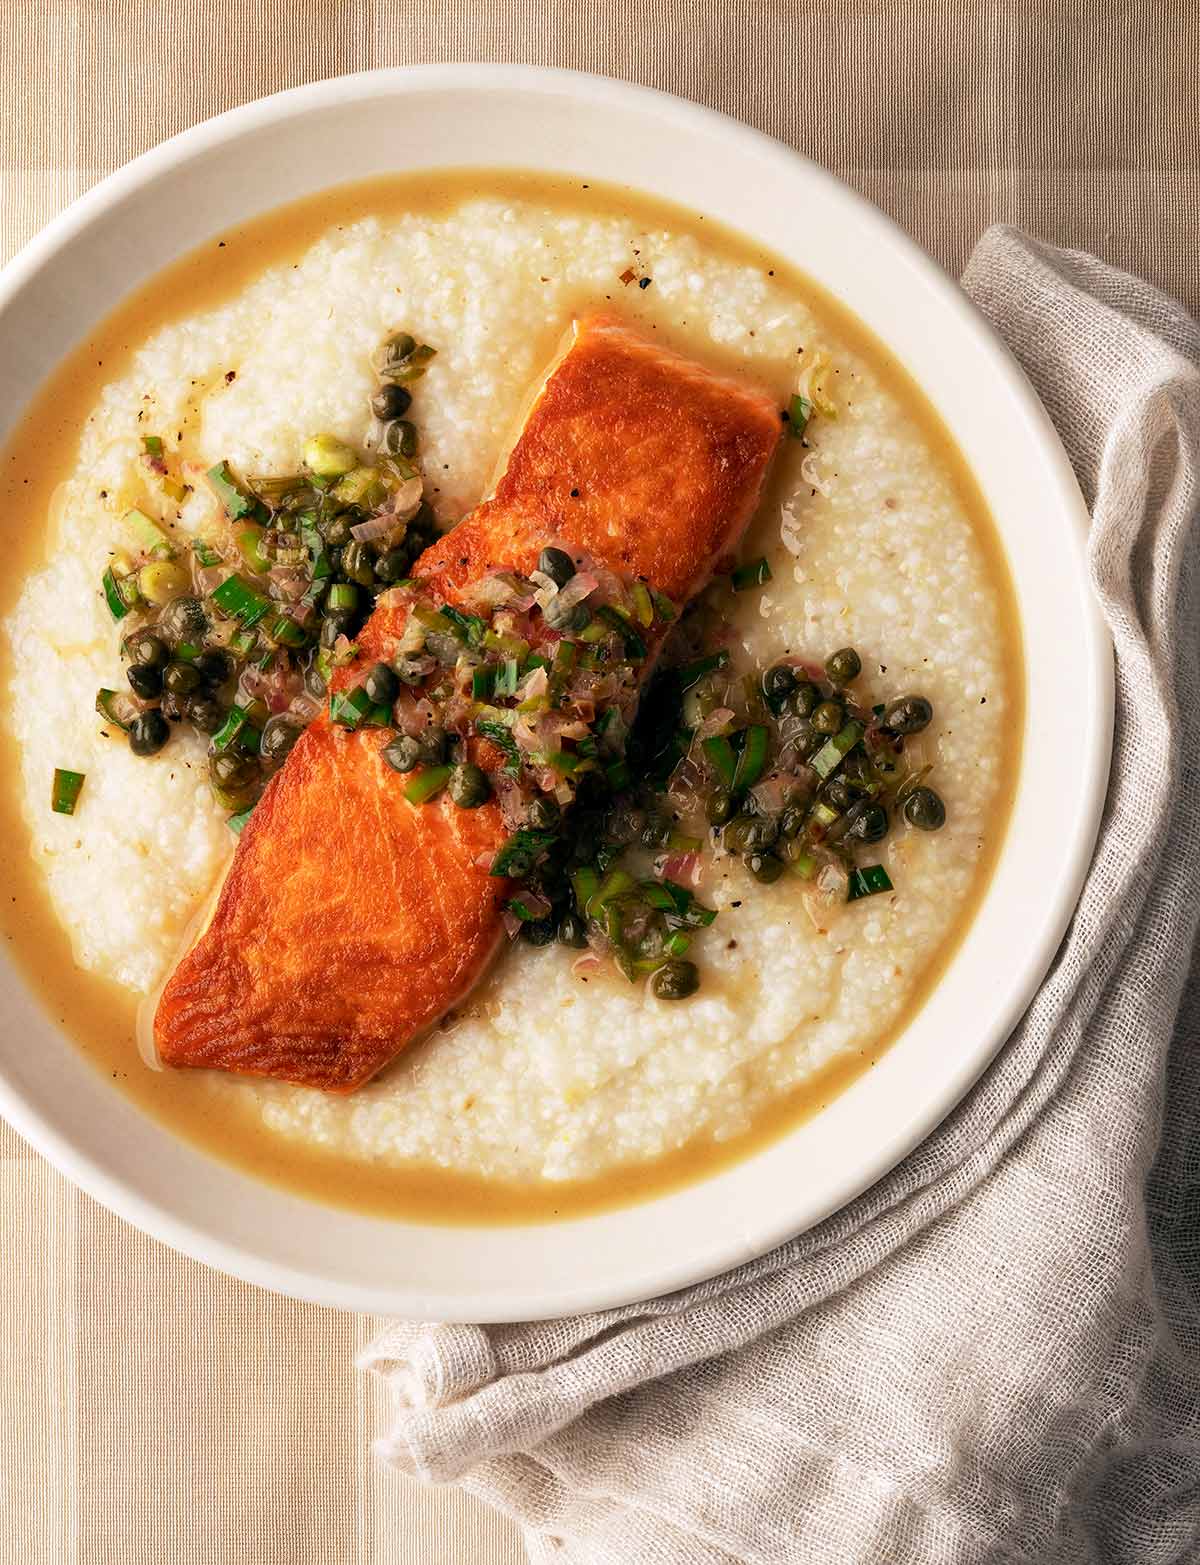 Salmon piccata served over grits